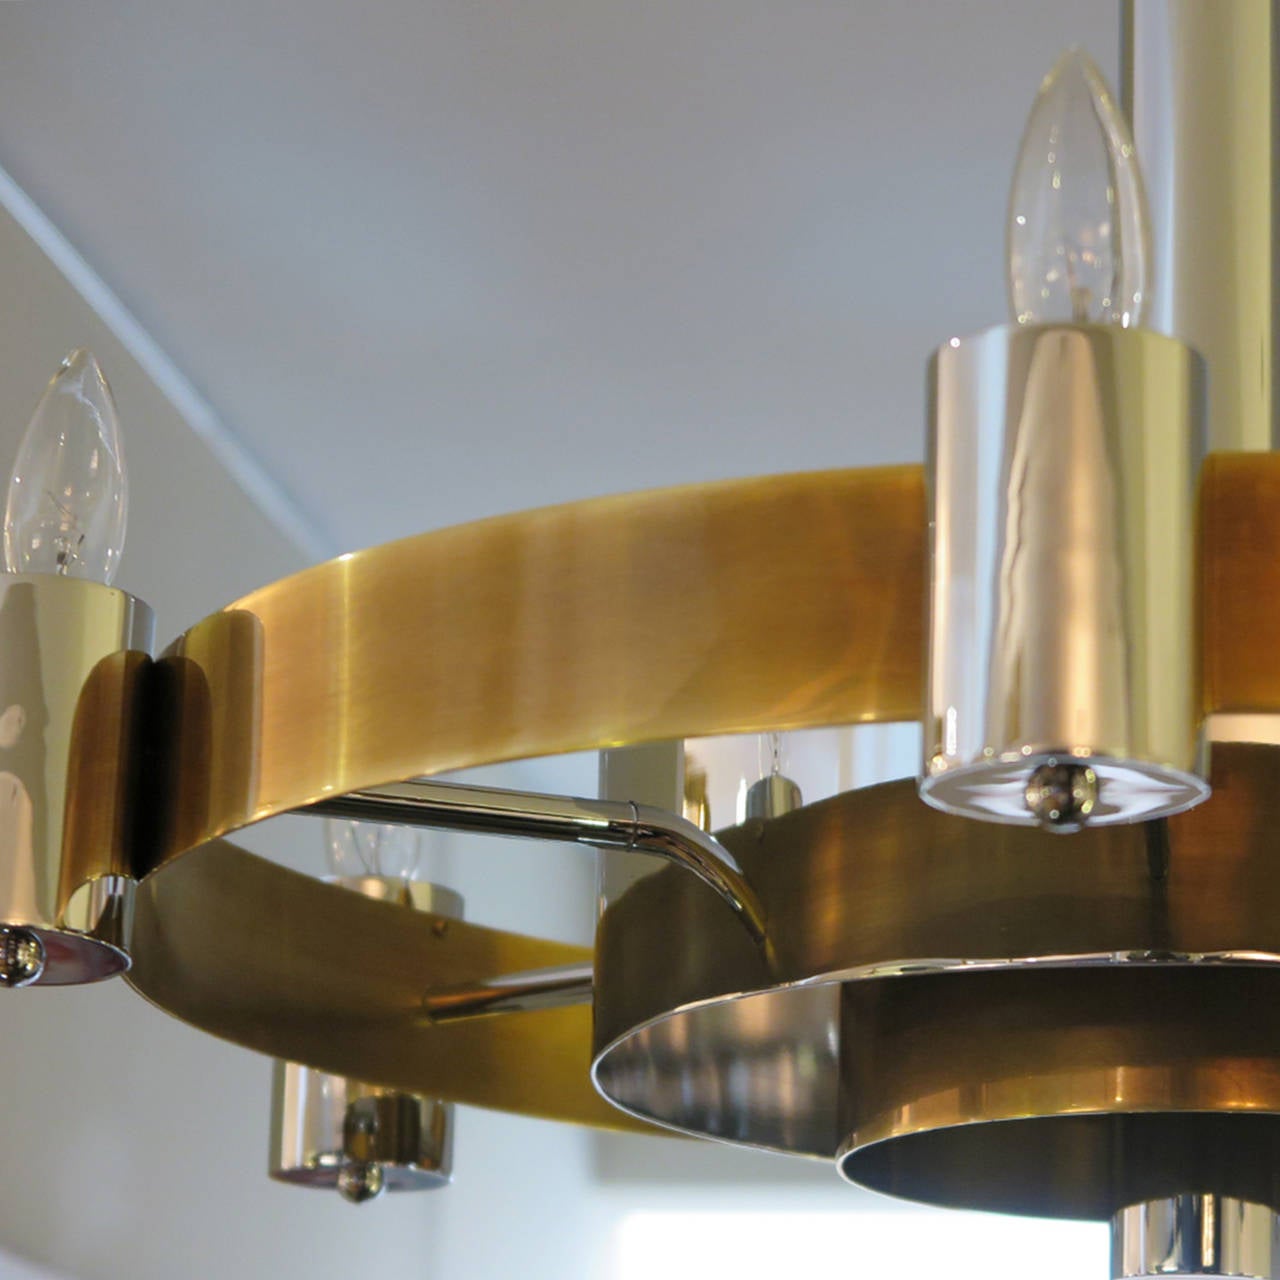 French circular, three-layered chandelier in antique brass and polished nickel. Six candelabra light fittings.